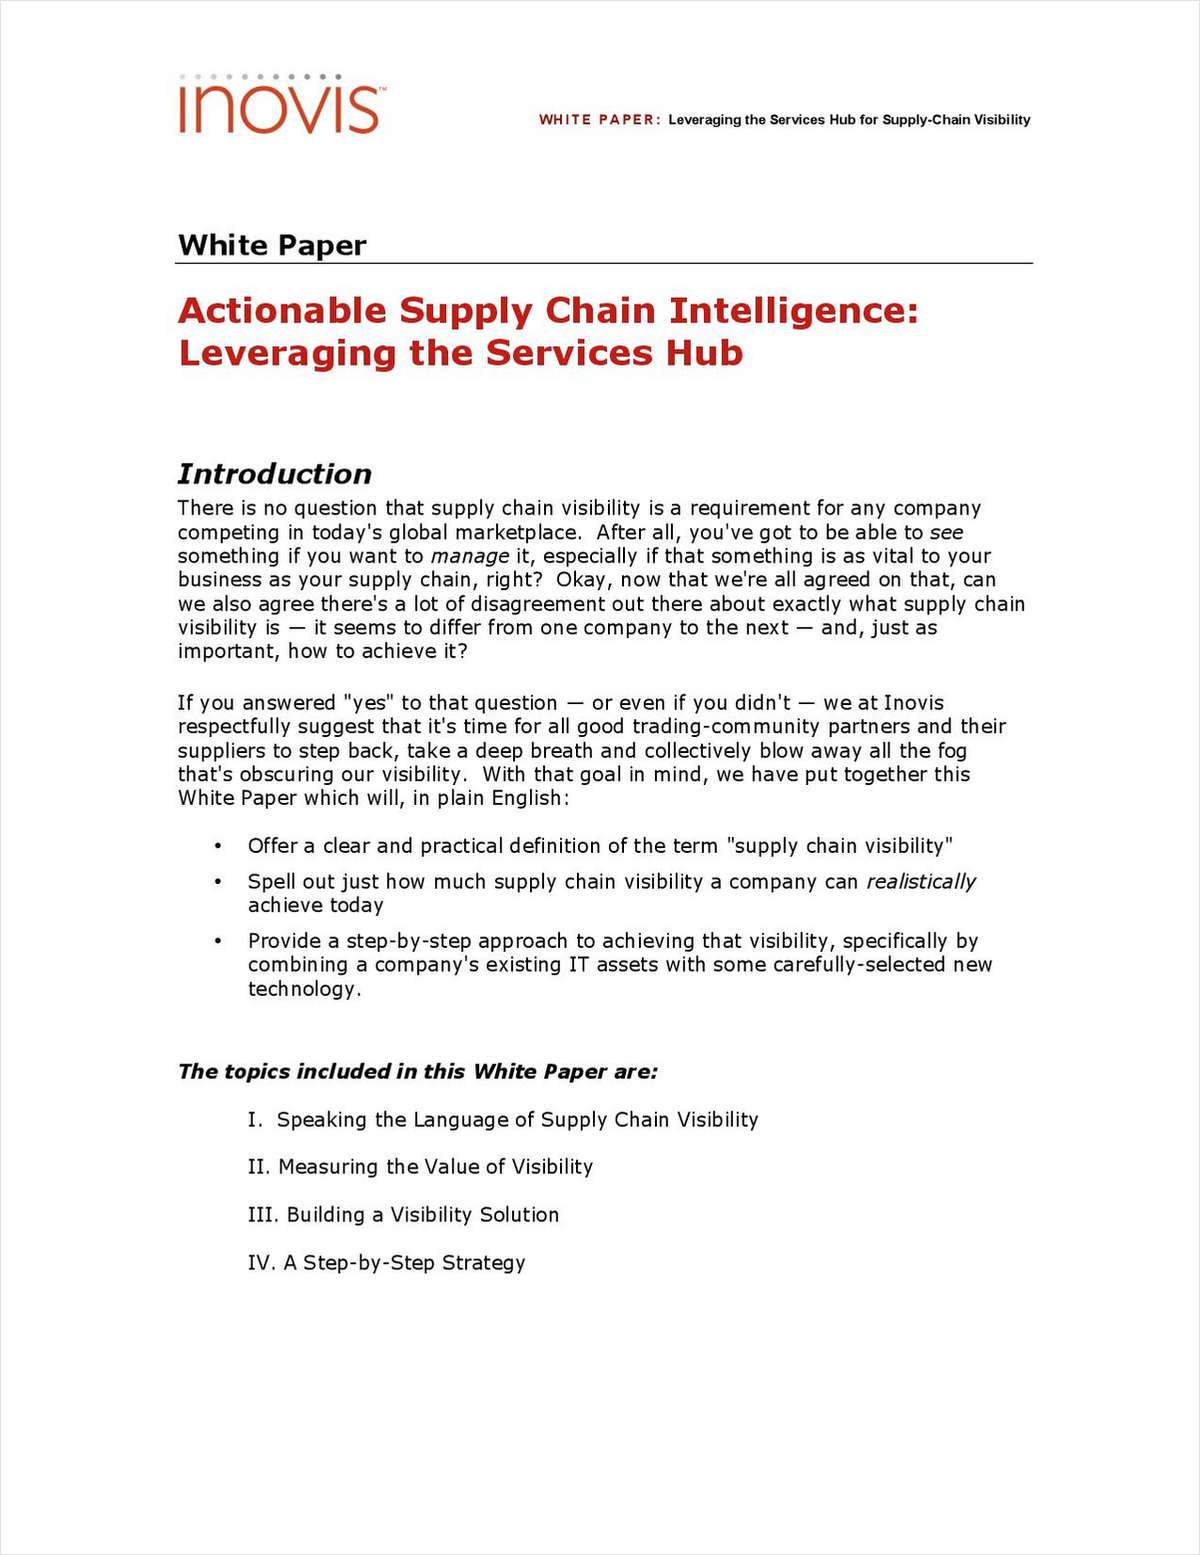 Actionable Supply Chain Intelligence: Leveraging the Services Hub